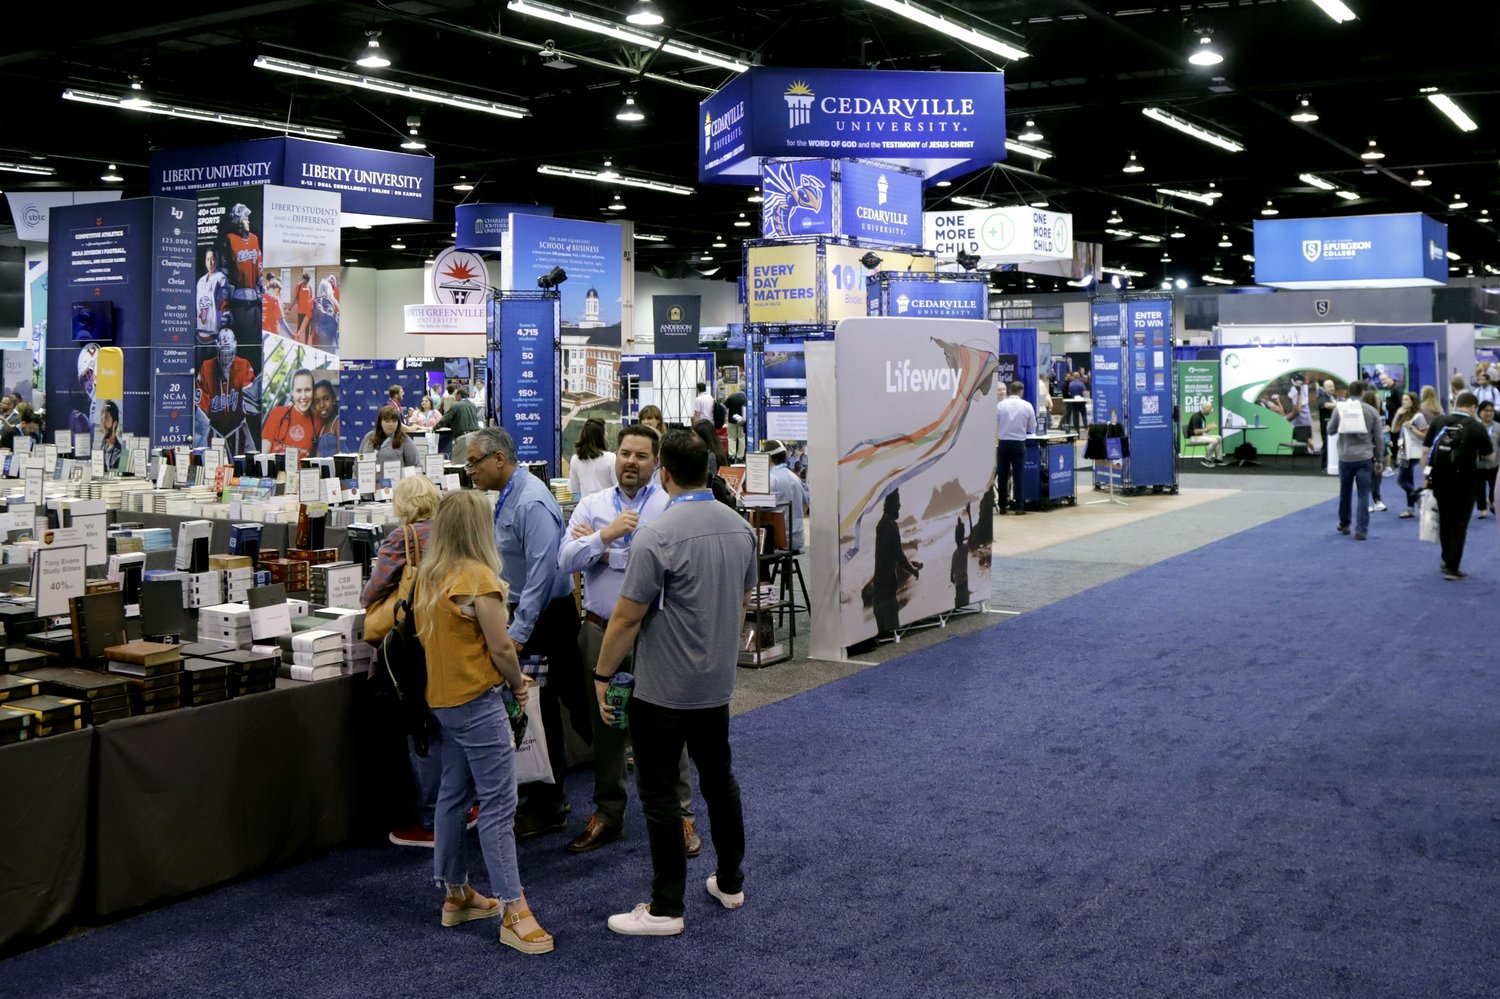 More than 100 exhibitors greeted Southern Baptists to the exhibit hall at the 2022 SBC Annual Meeting in Anaheim, Calif. (Baptist Press/Luc Stringer)